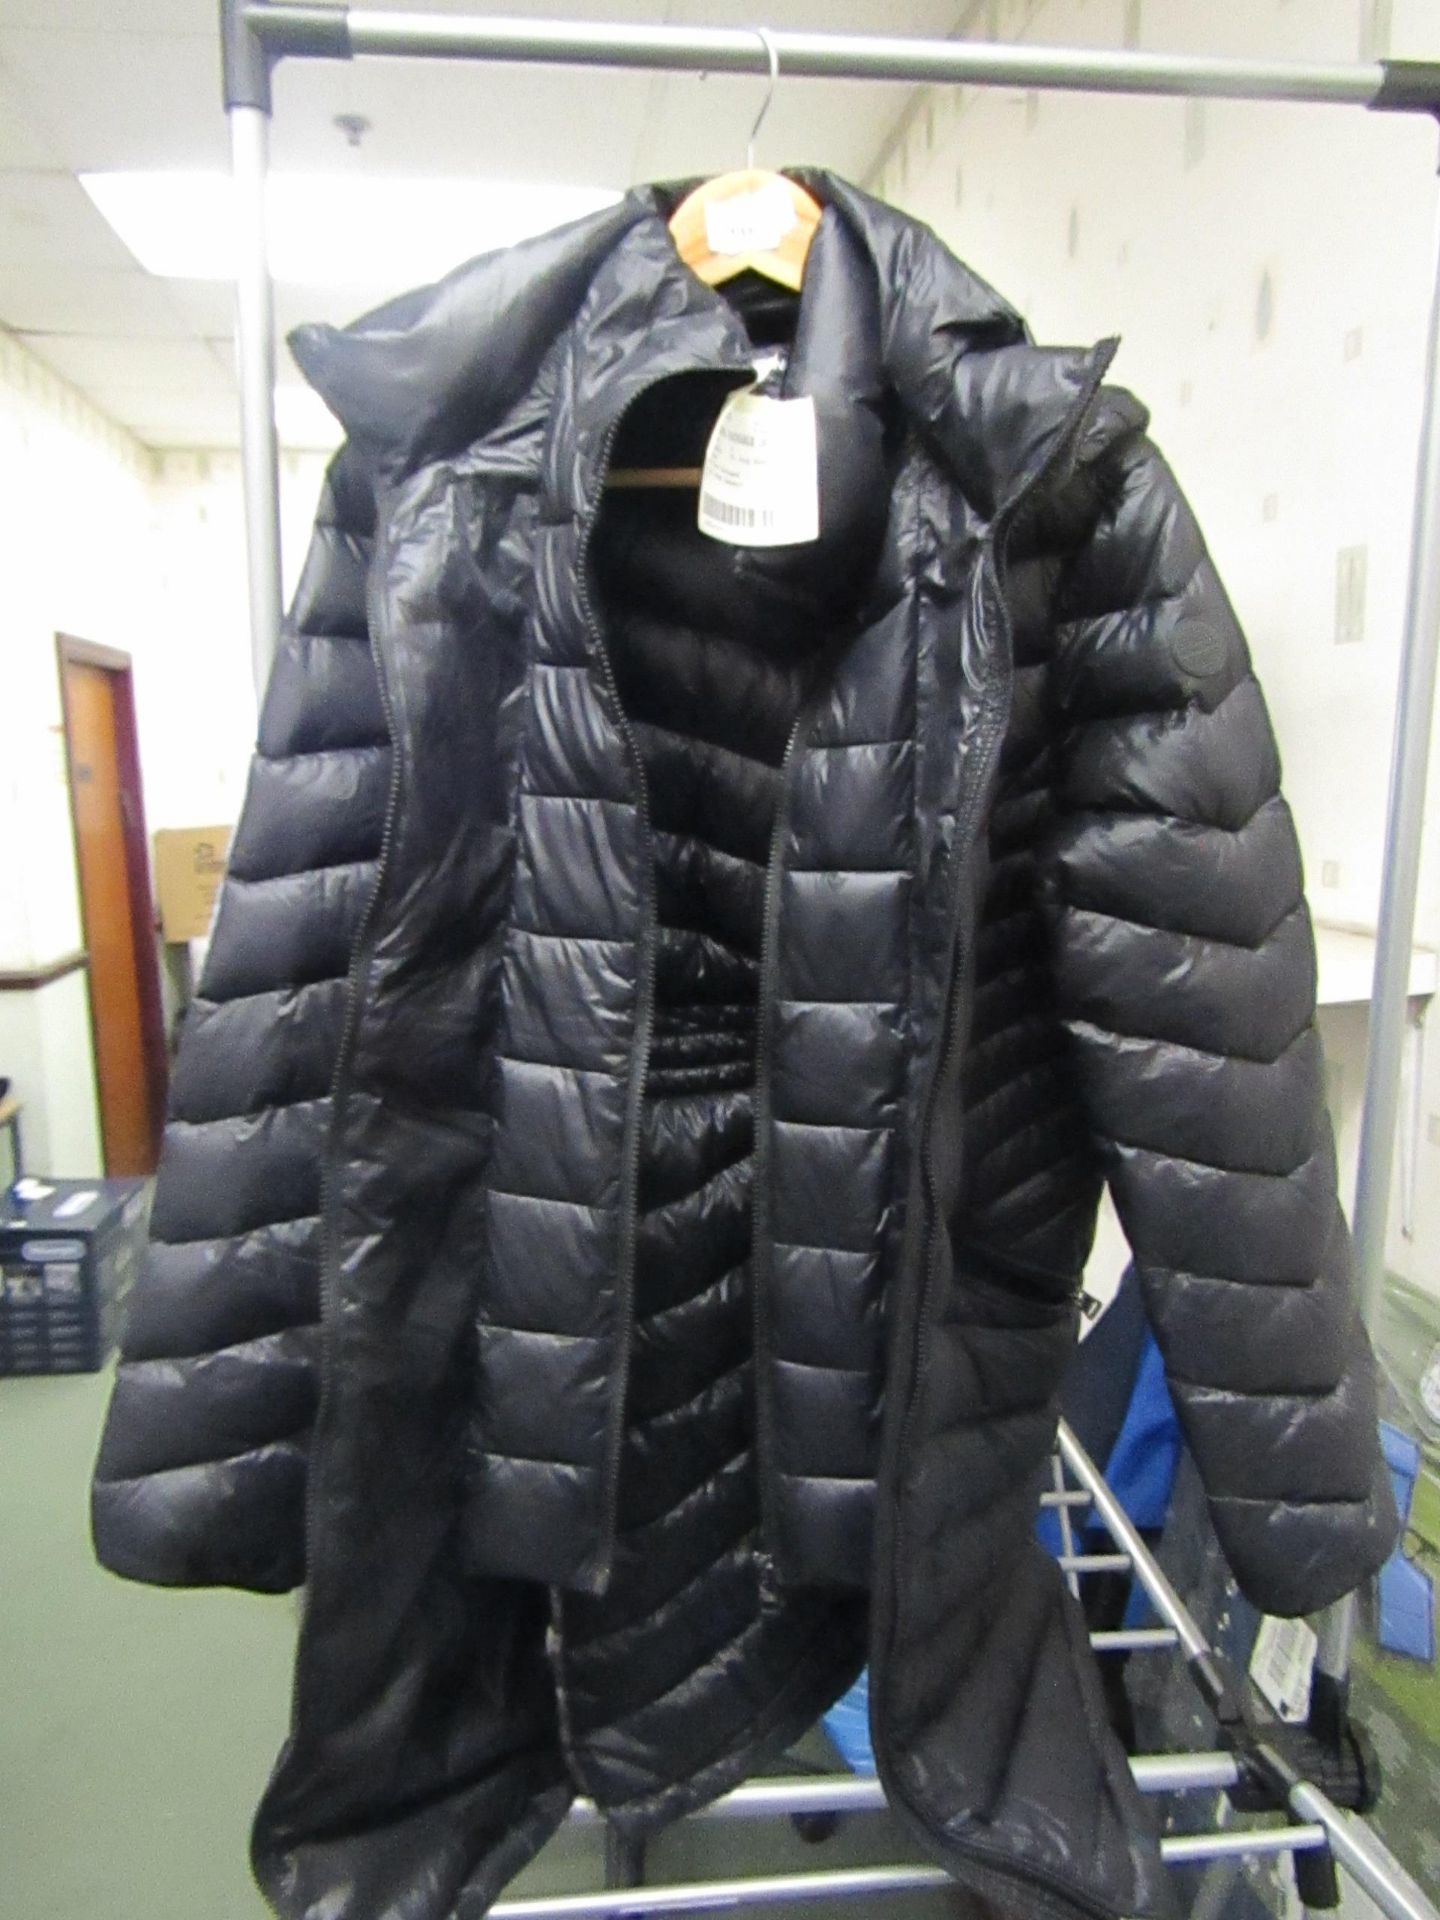 Andrew Marc Ladies Packable Premium Down Jacket, size Large, has rip in hte collar part